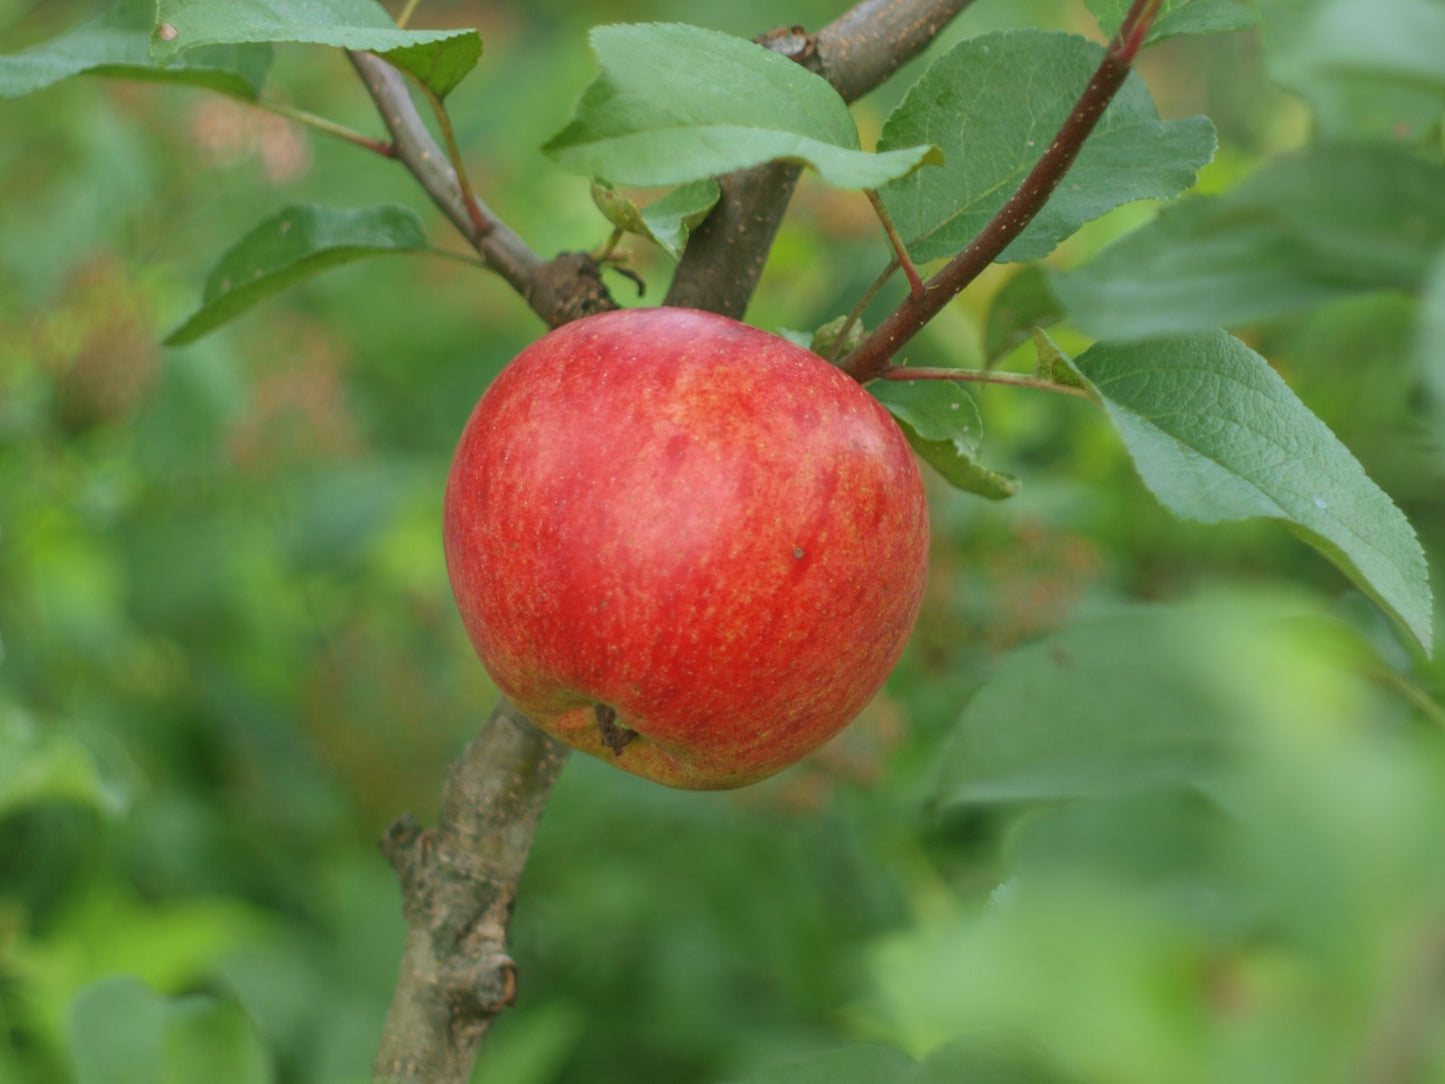 Natural, Non-GMO Produce, Red Apples